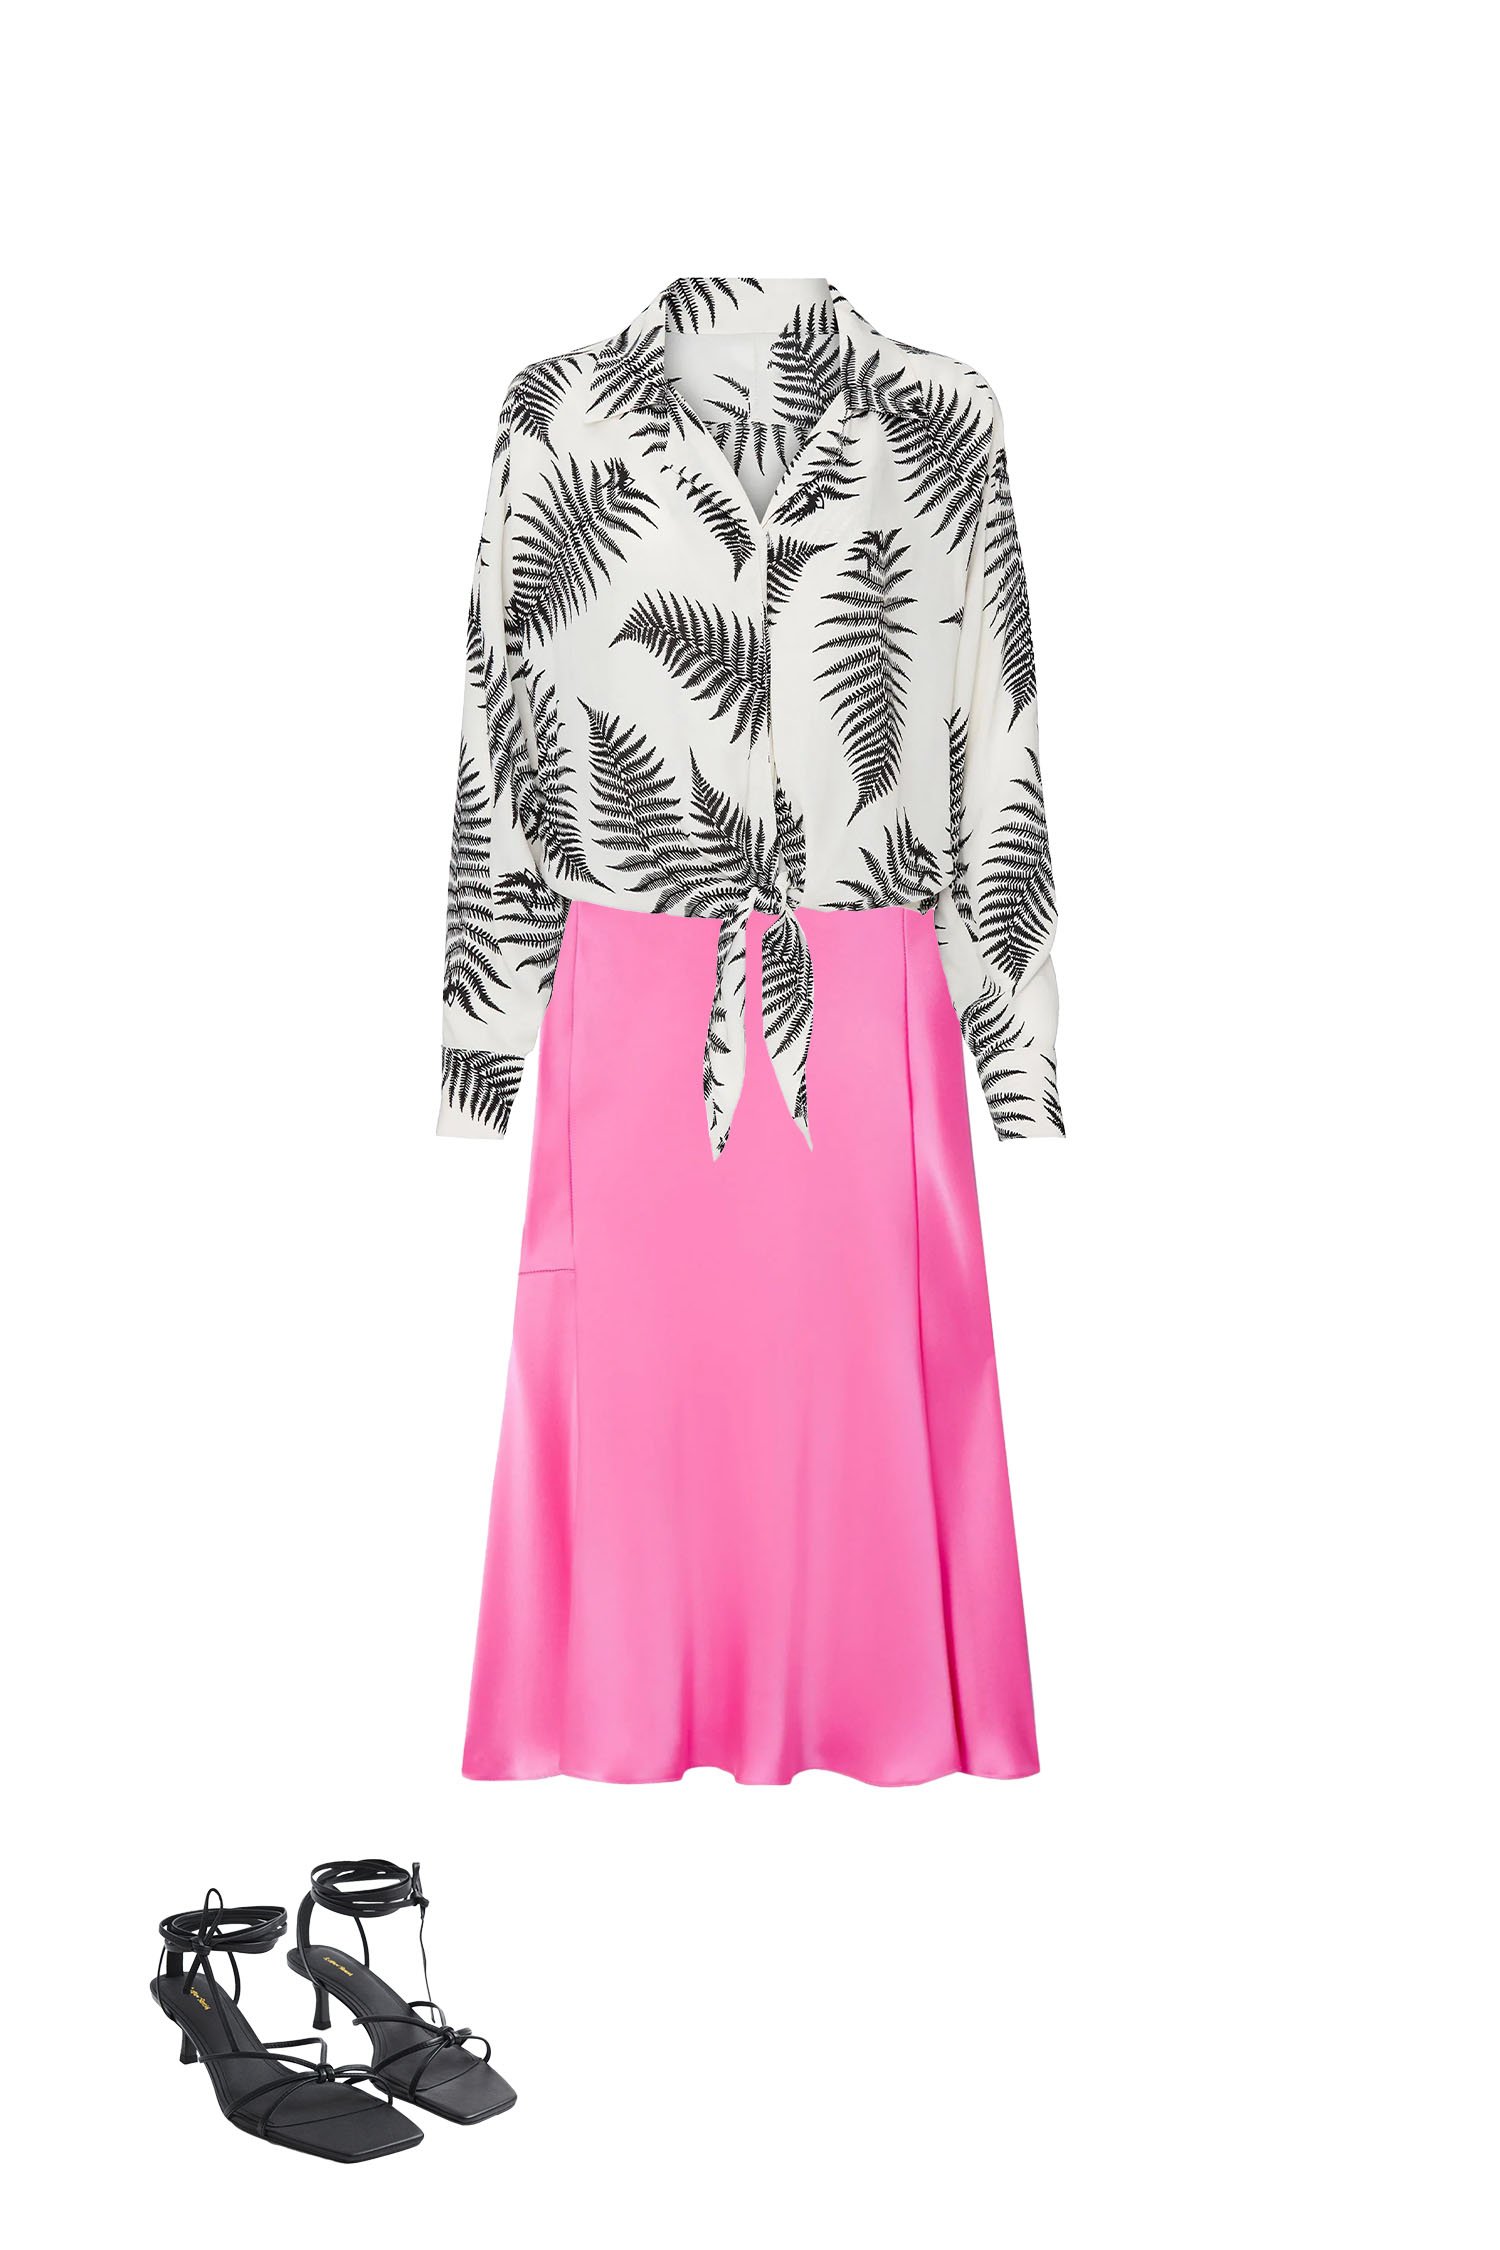 Hot Pink Satin Skirt with Black Leaf Print Tie Front Shirt and Black Strappy Sandals